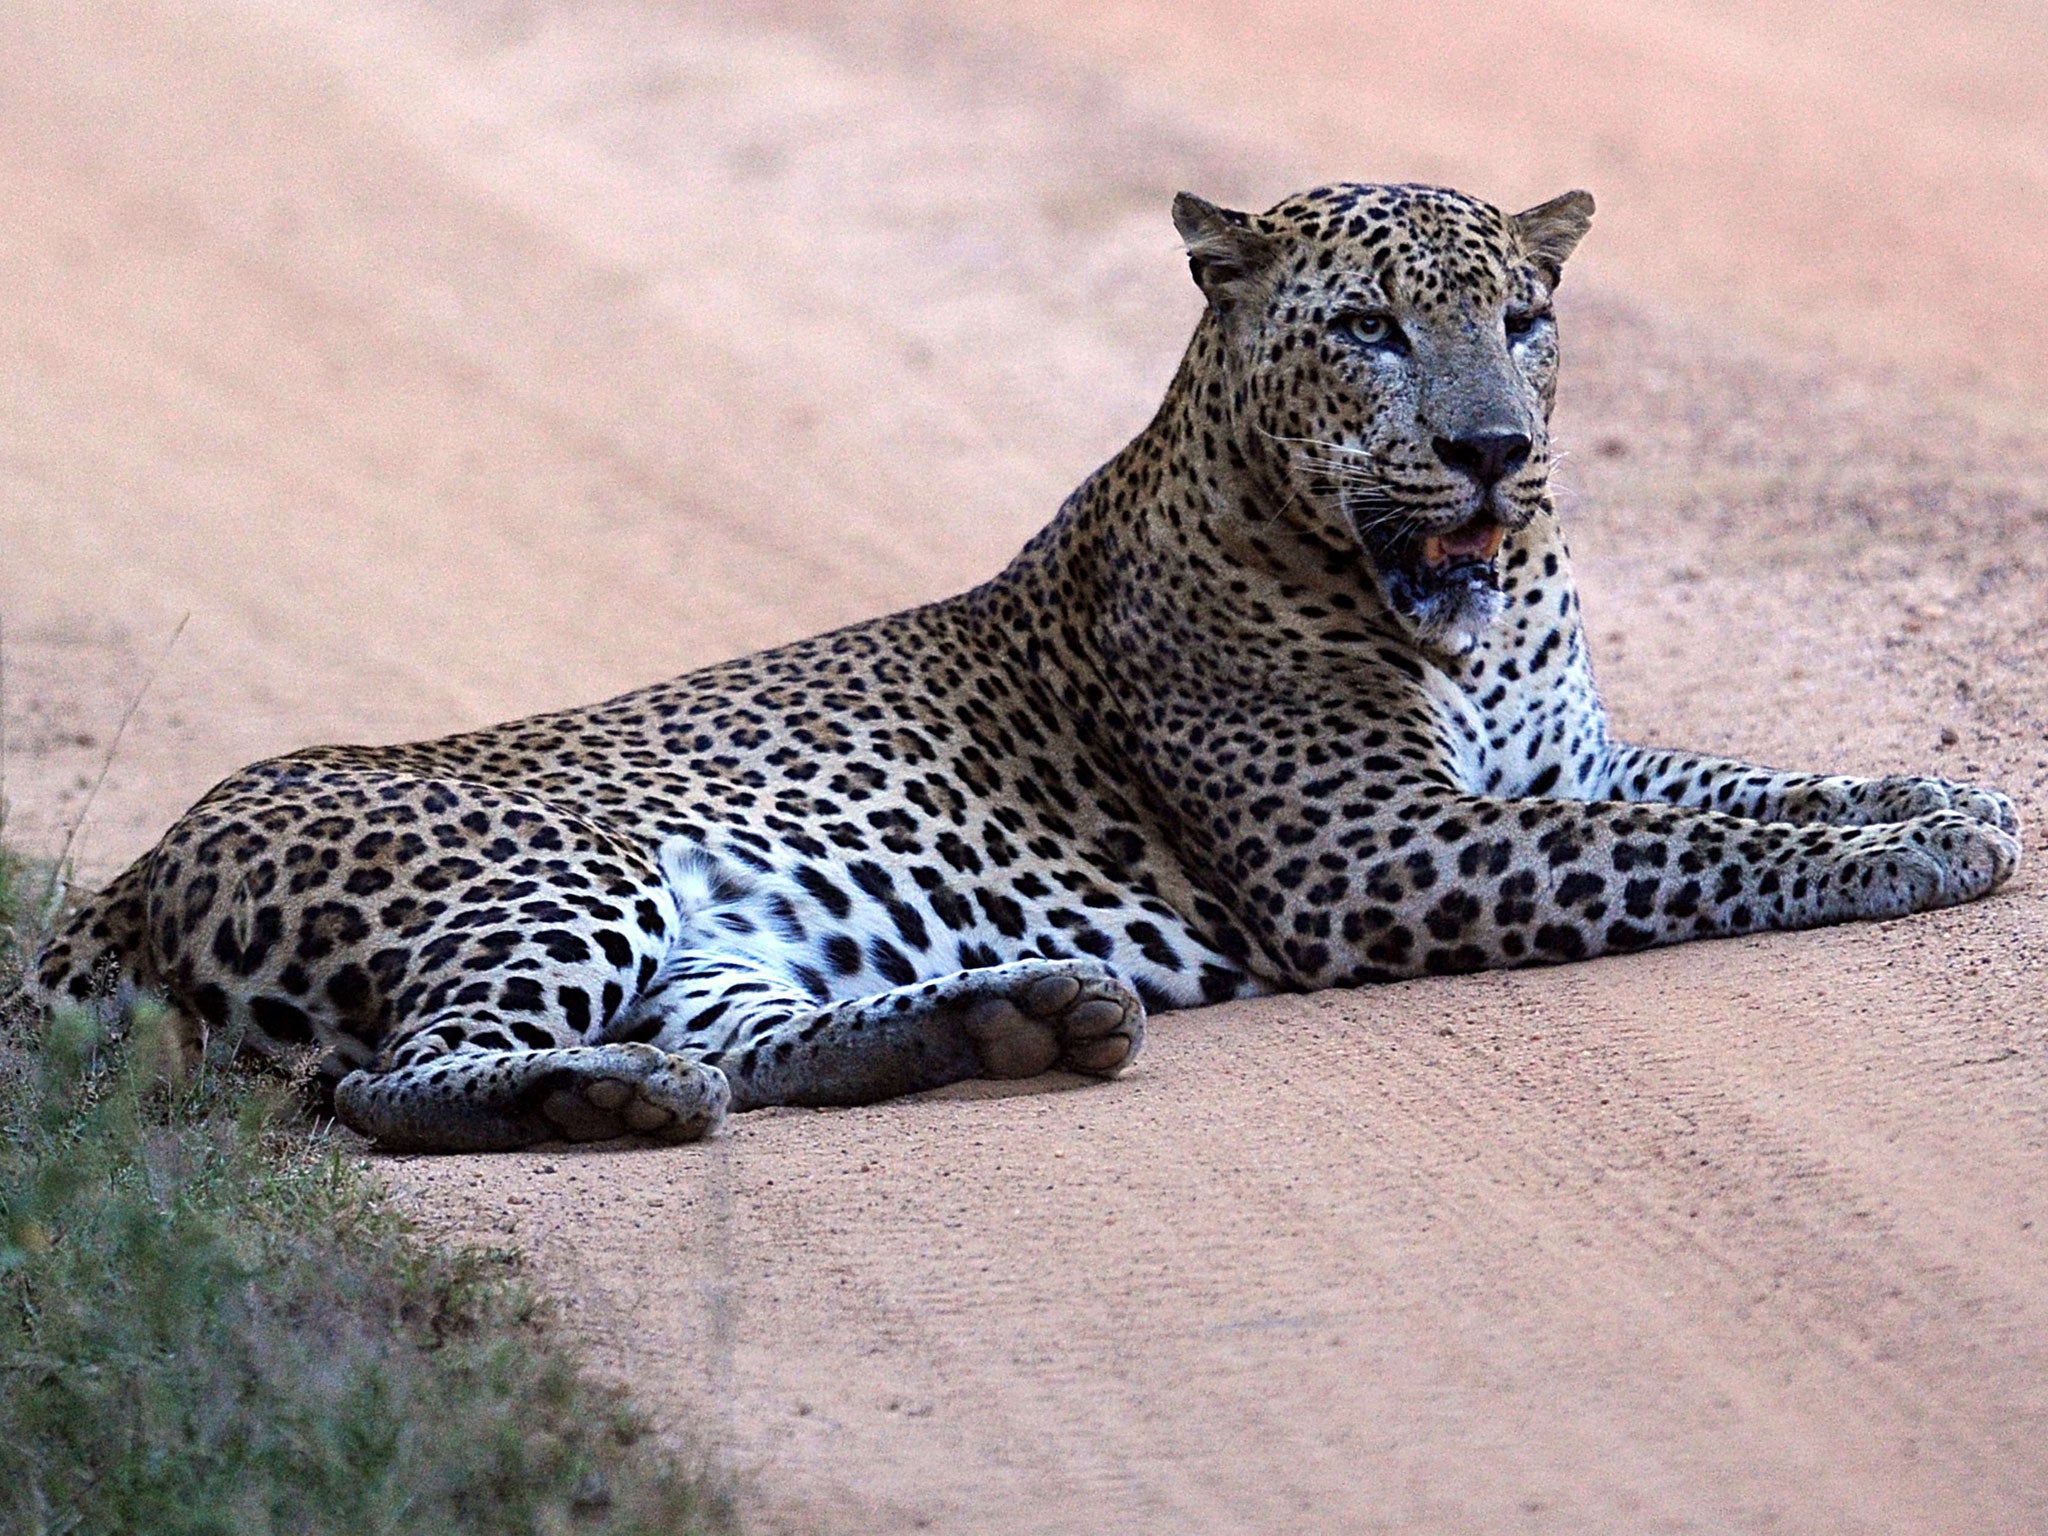 A leopard like this one attacked Rupji Gamit, and his wife saved him